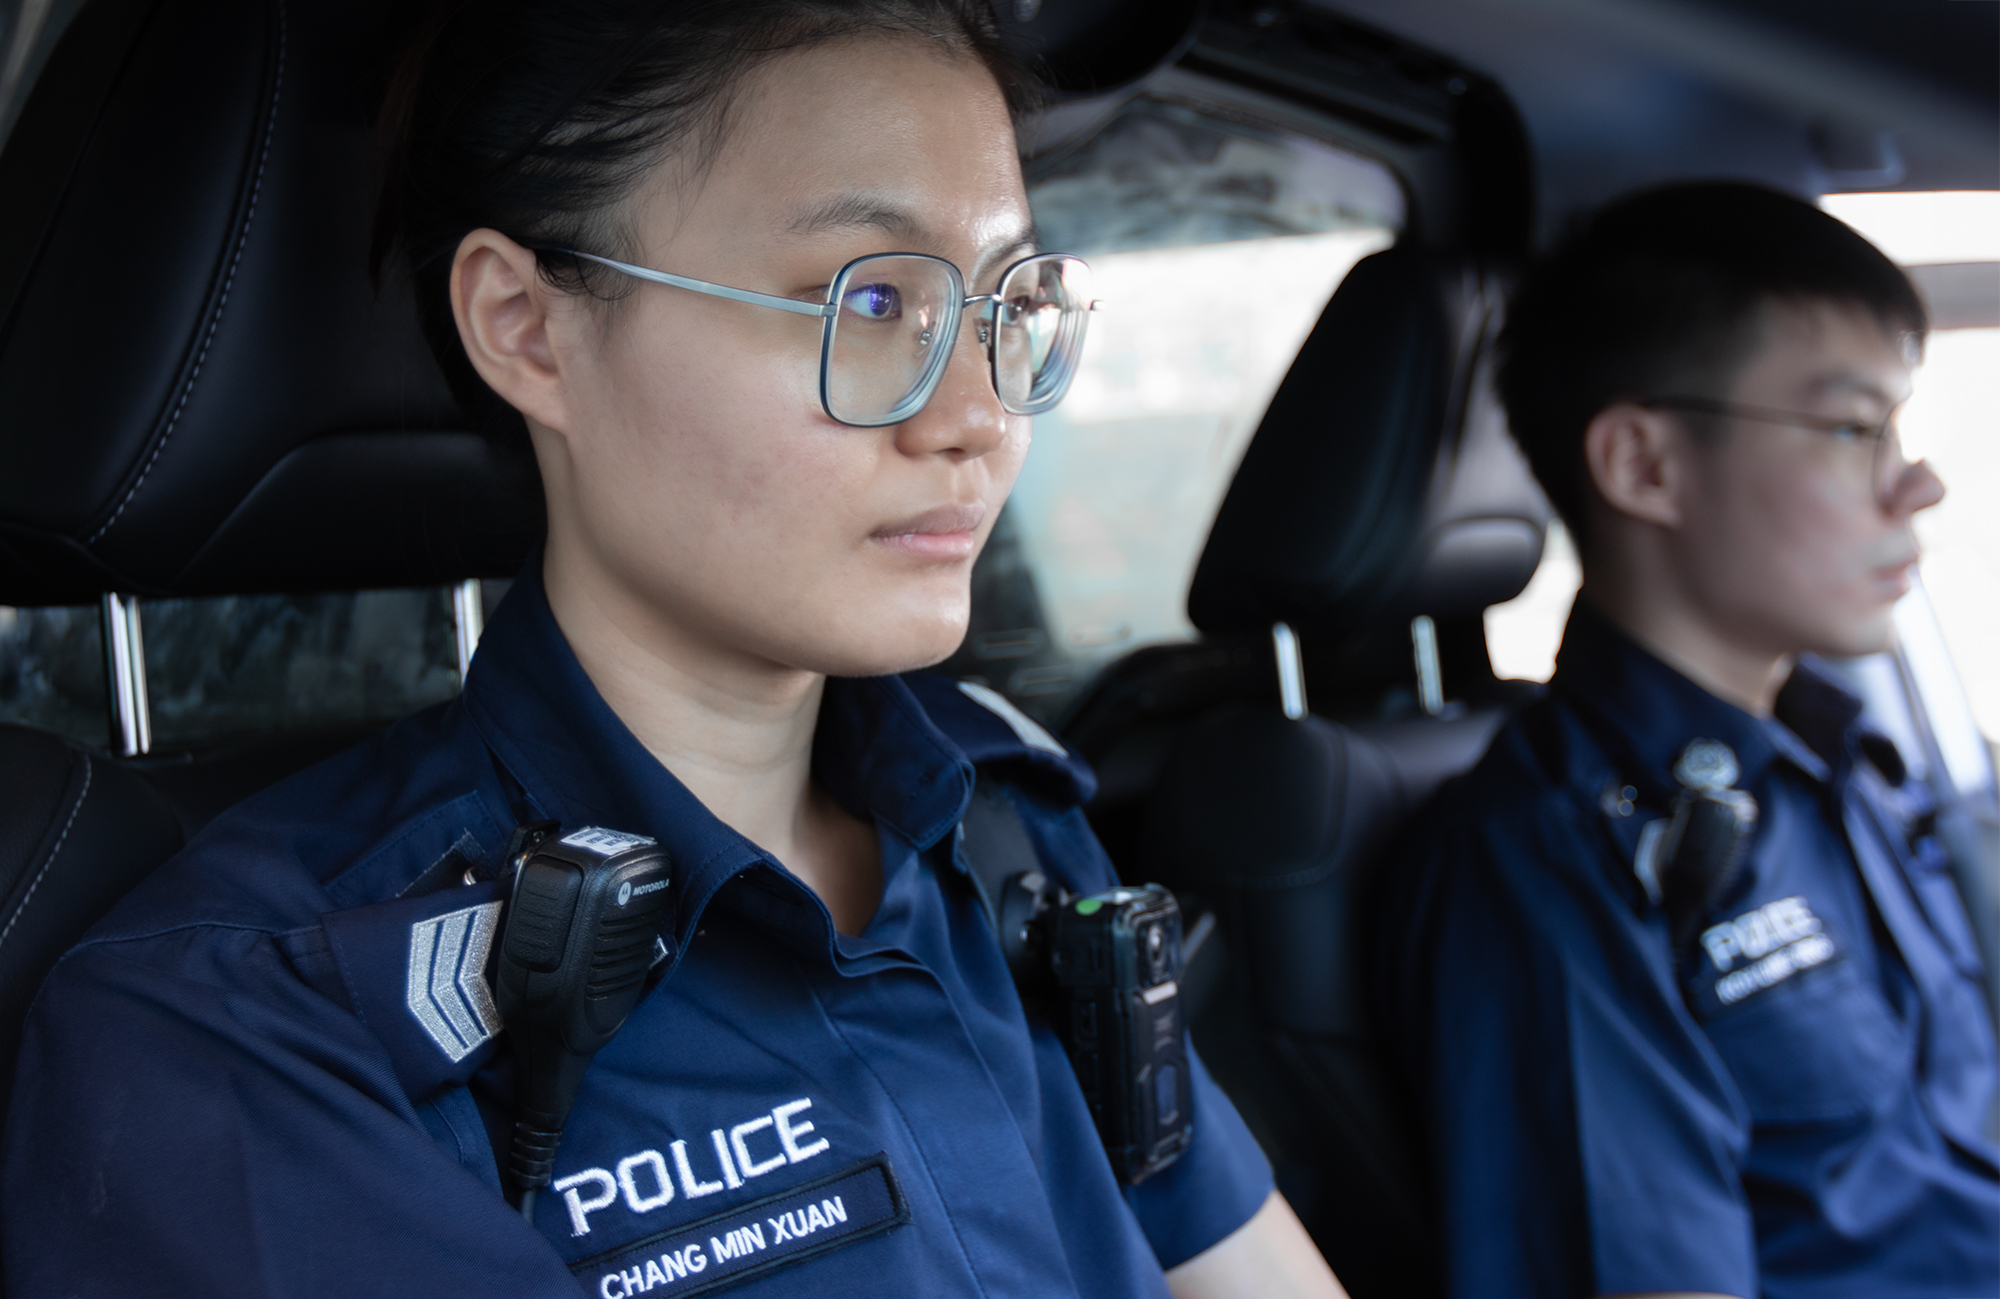 Sgt (V) Chang on patrol duties with her partner, Special Constable Koh Liang Zheng. PHOTO: Alethea Lee